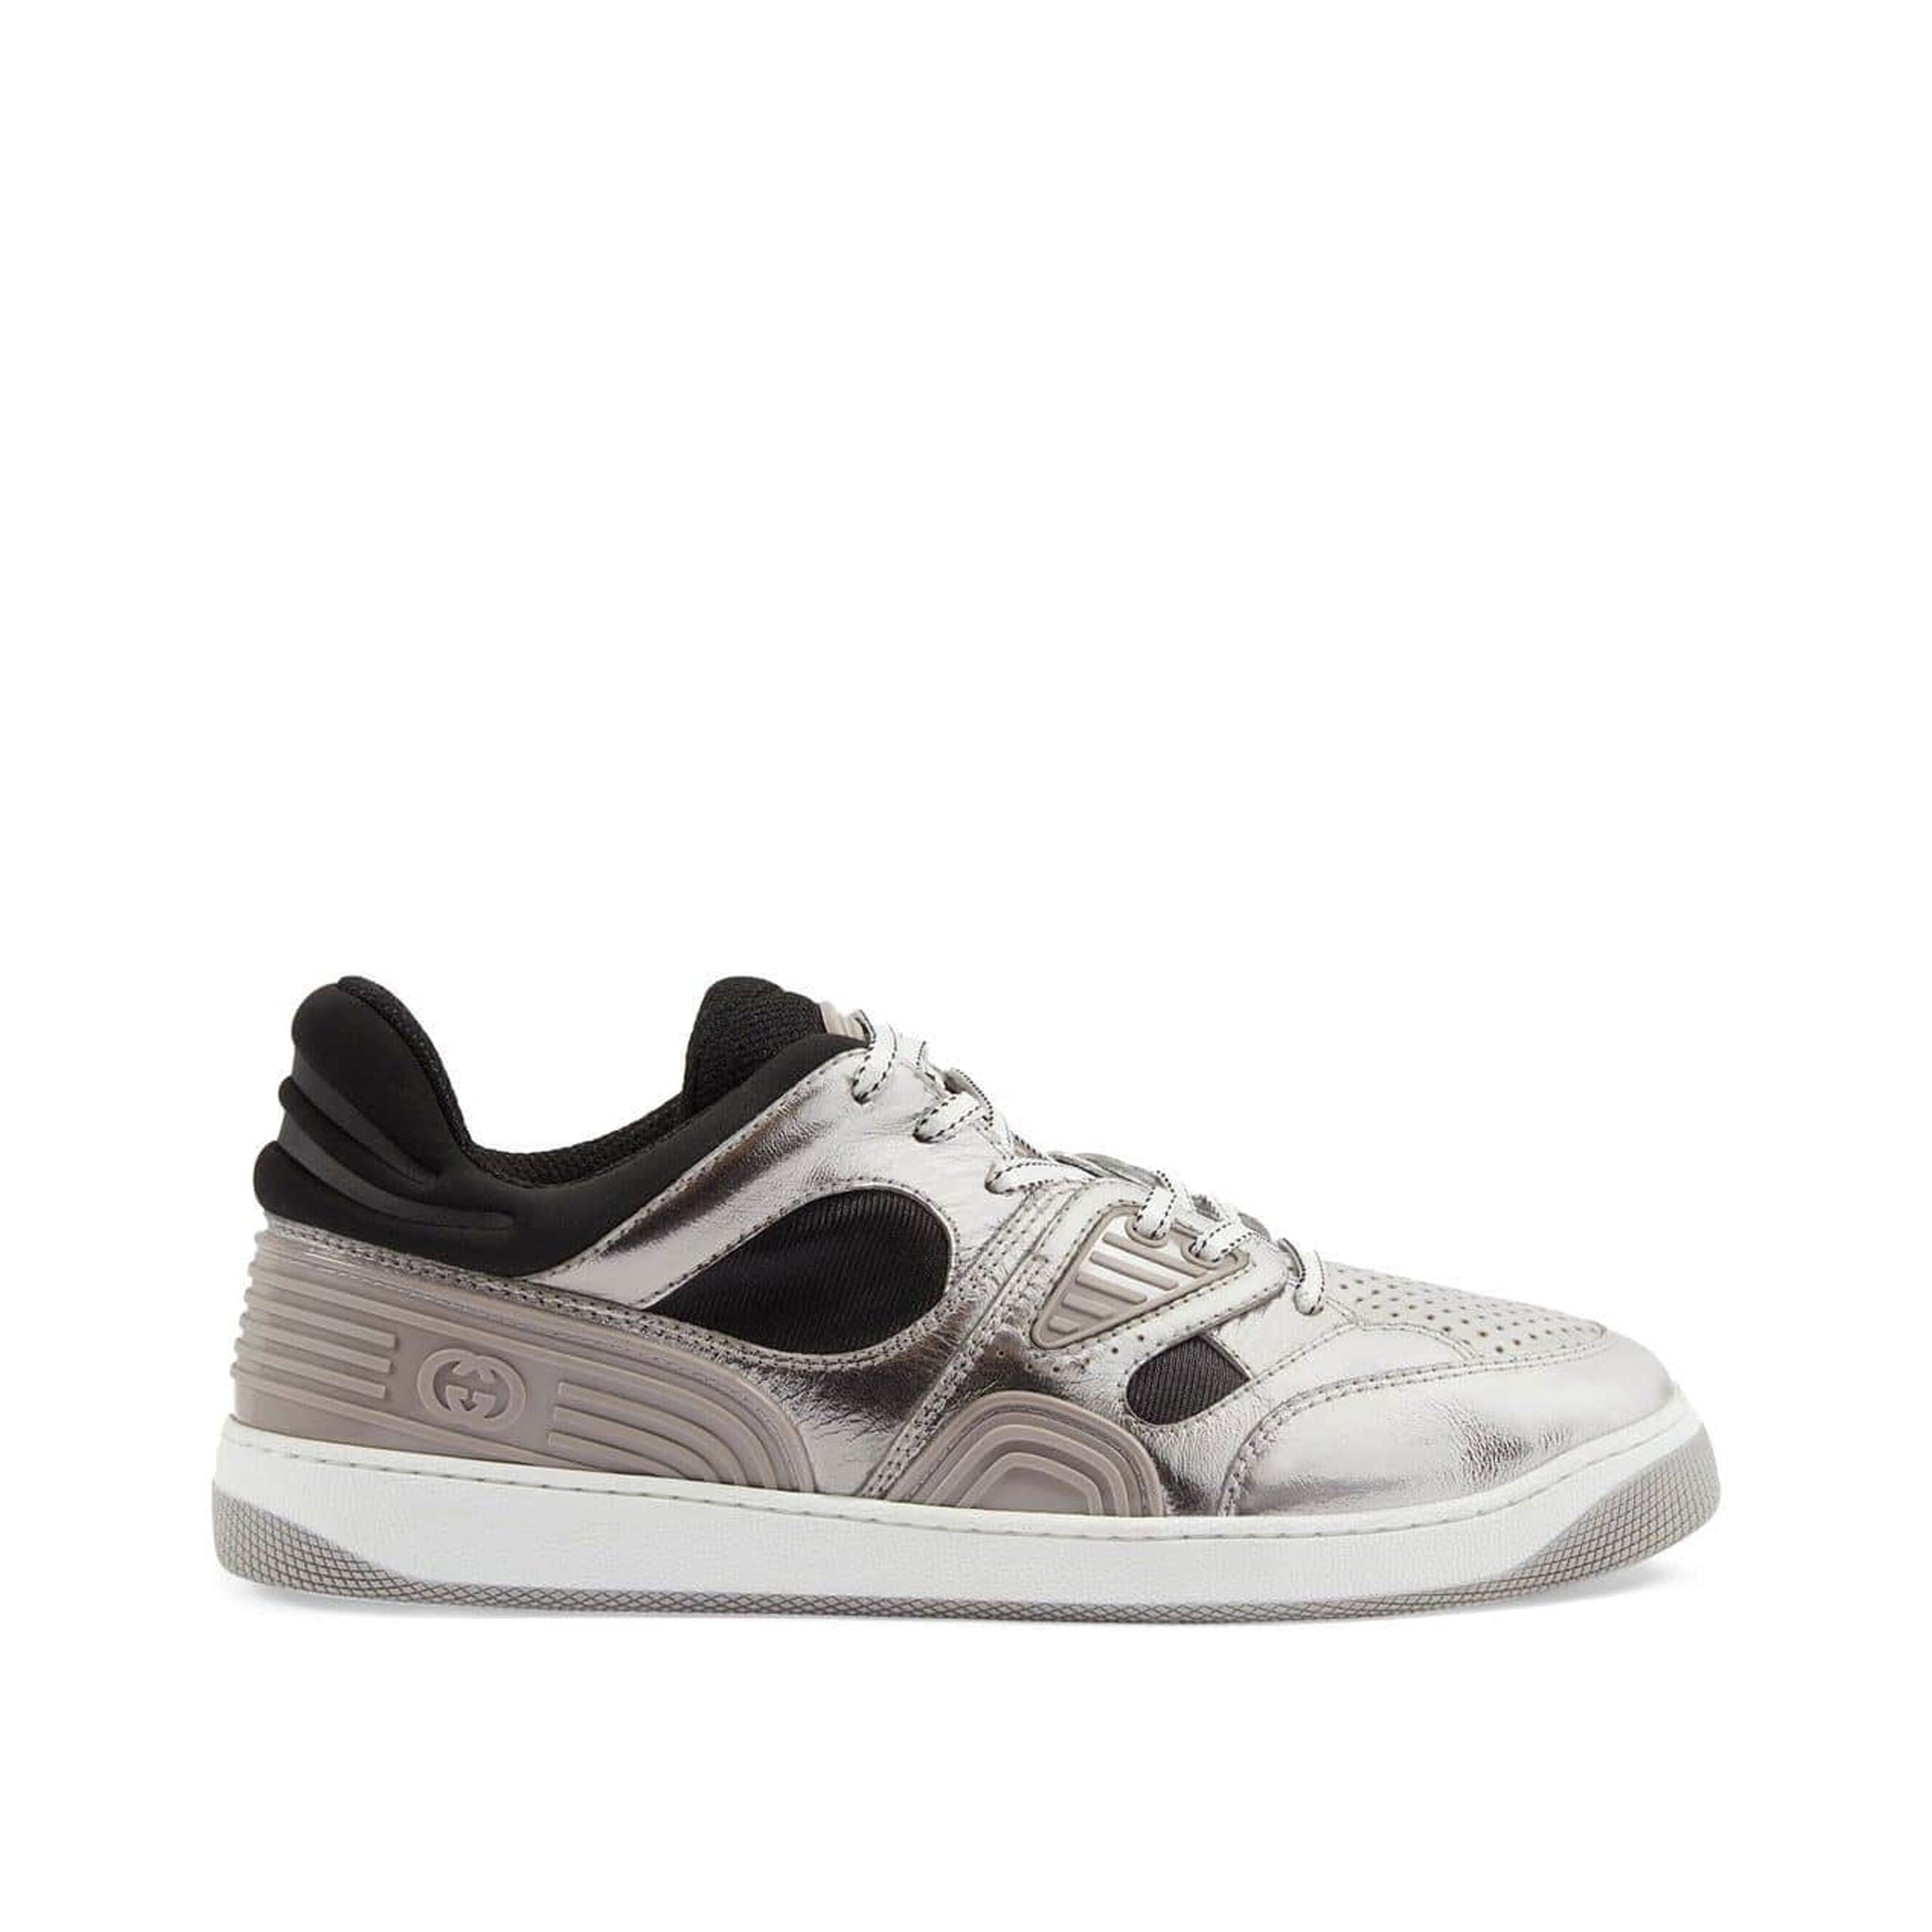 GUCCI-OUTLET-SALE-Gucci-Leather-Basket-Sneakers-Sneakers-ARCHIVE-COLLECTION.jpg